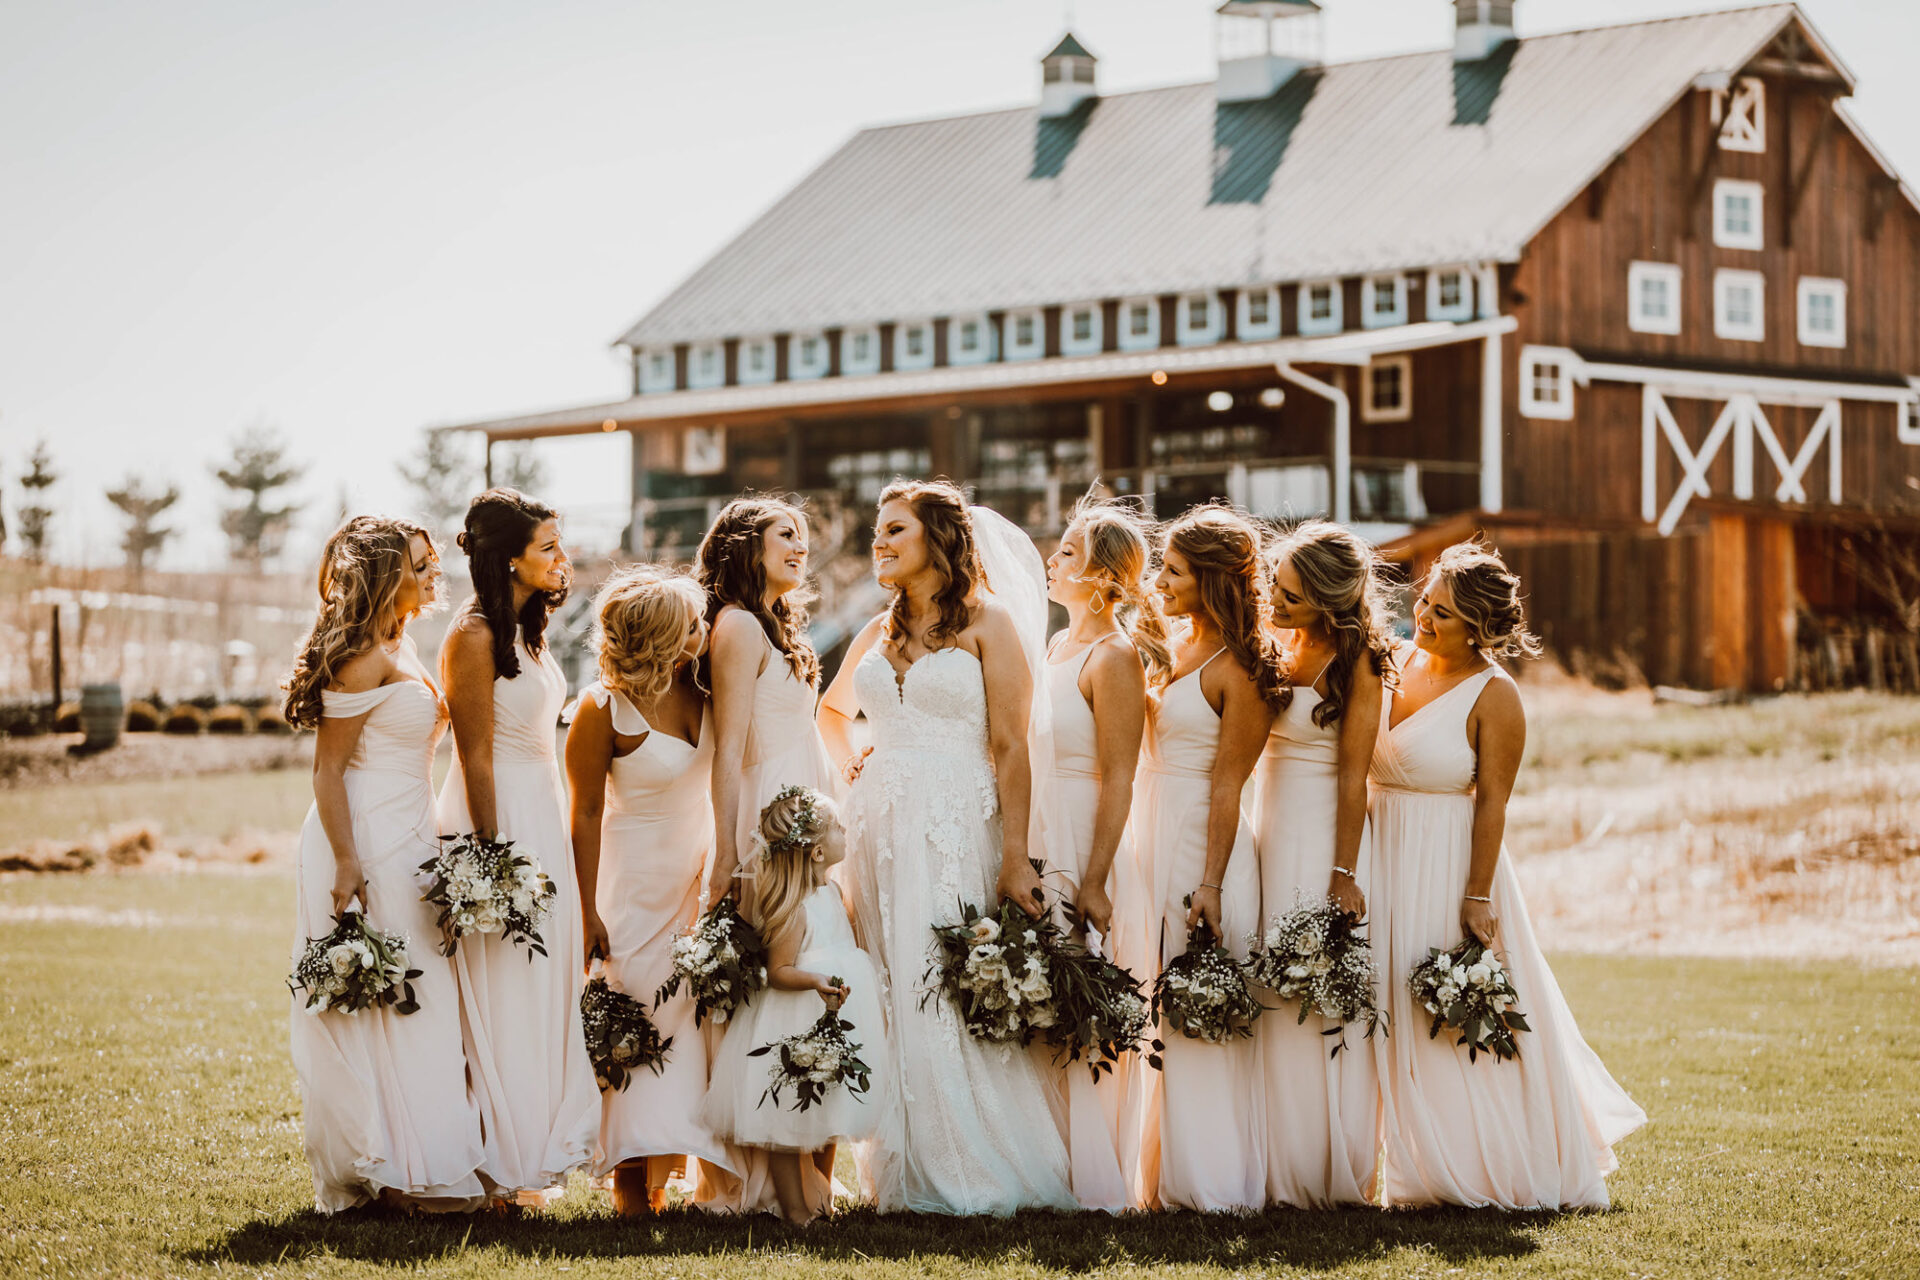 Brides and bridesmaids sharing a fun moment by the barn at Zion Springs, a rustic elegant wedding venue in Virginia.